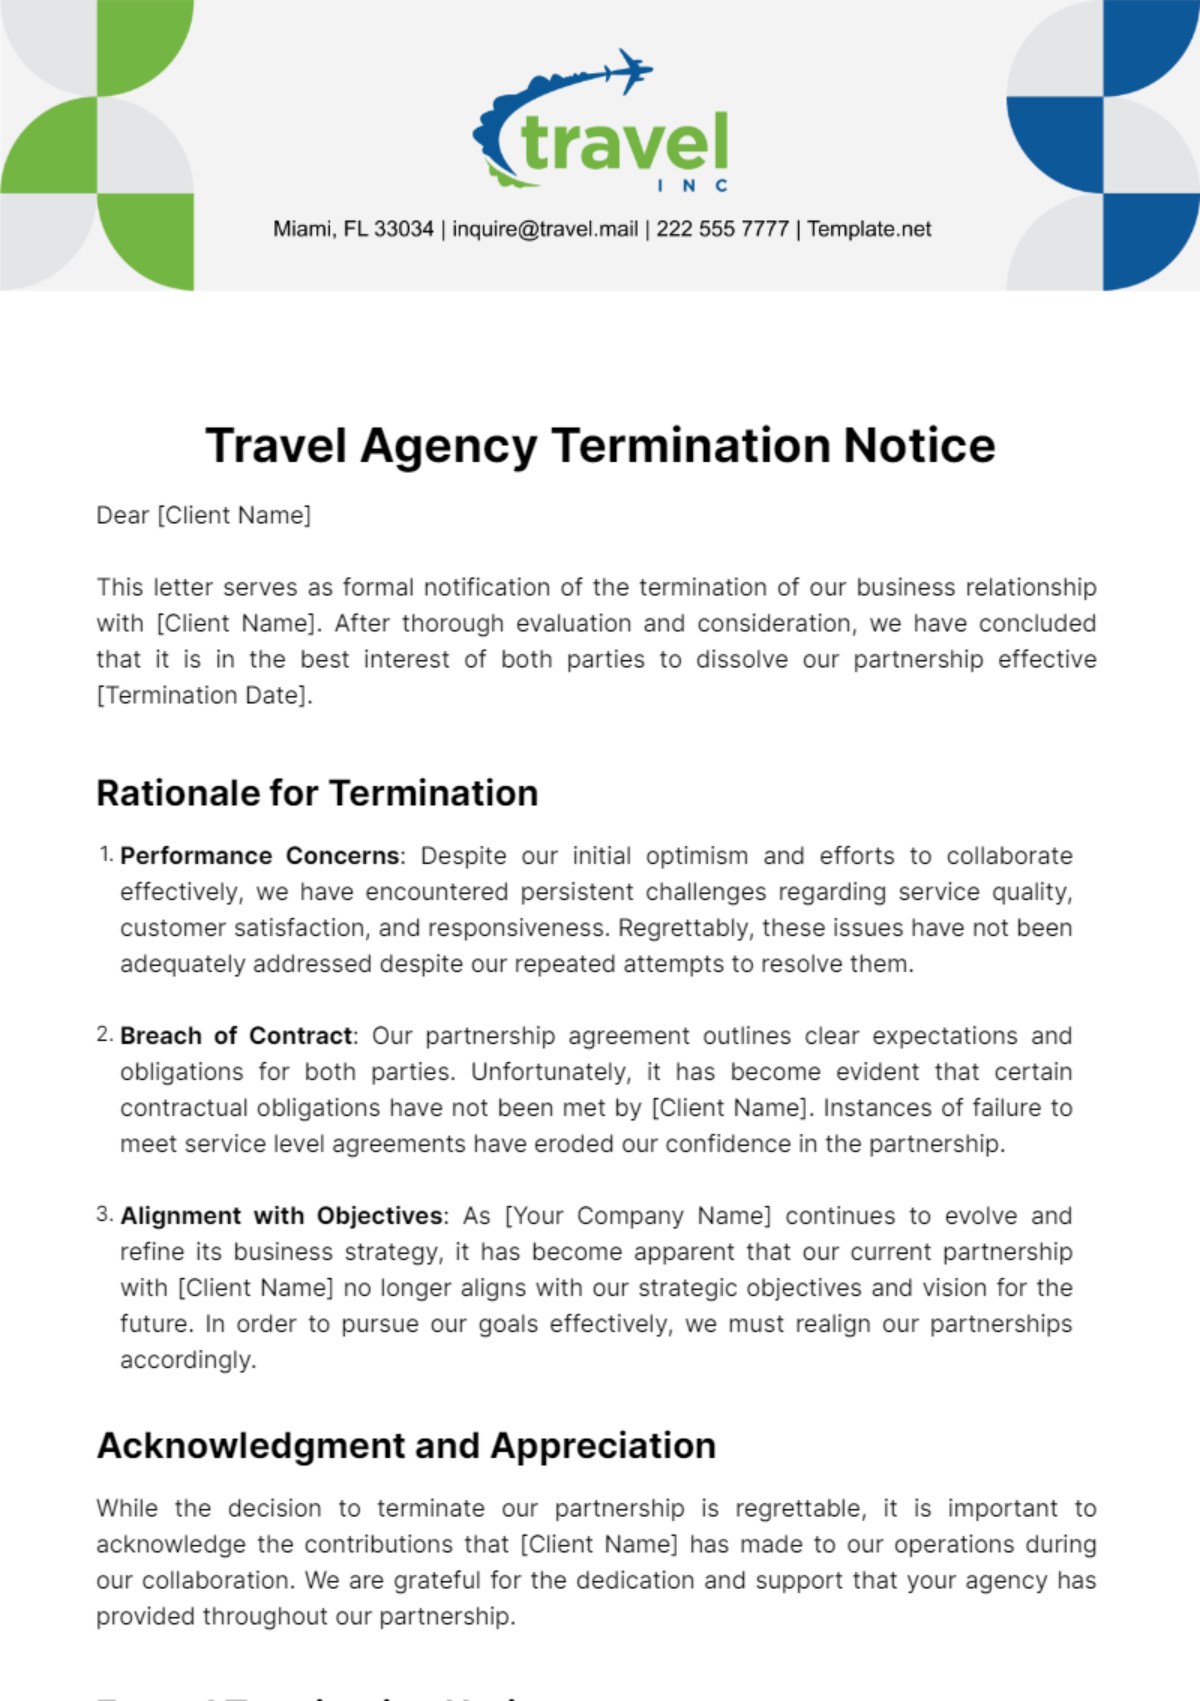 Free Travel Agency Termination Notice Template